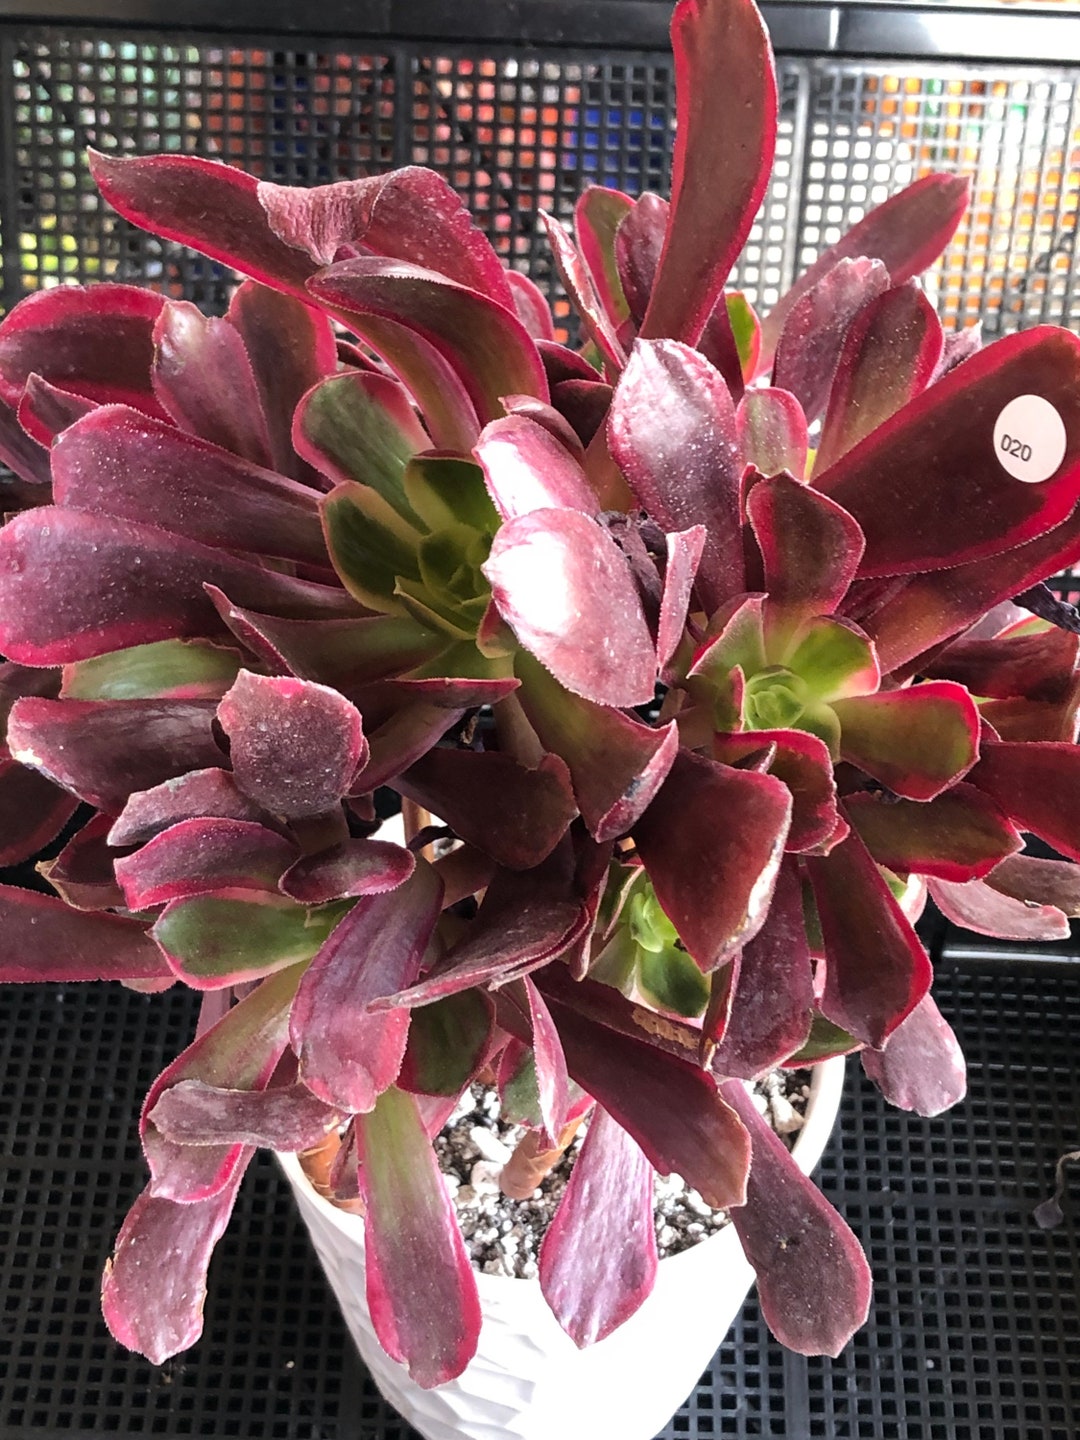 Aeonium Eden Big Cluster With Lots of Babies - Etsy